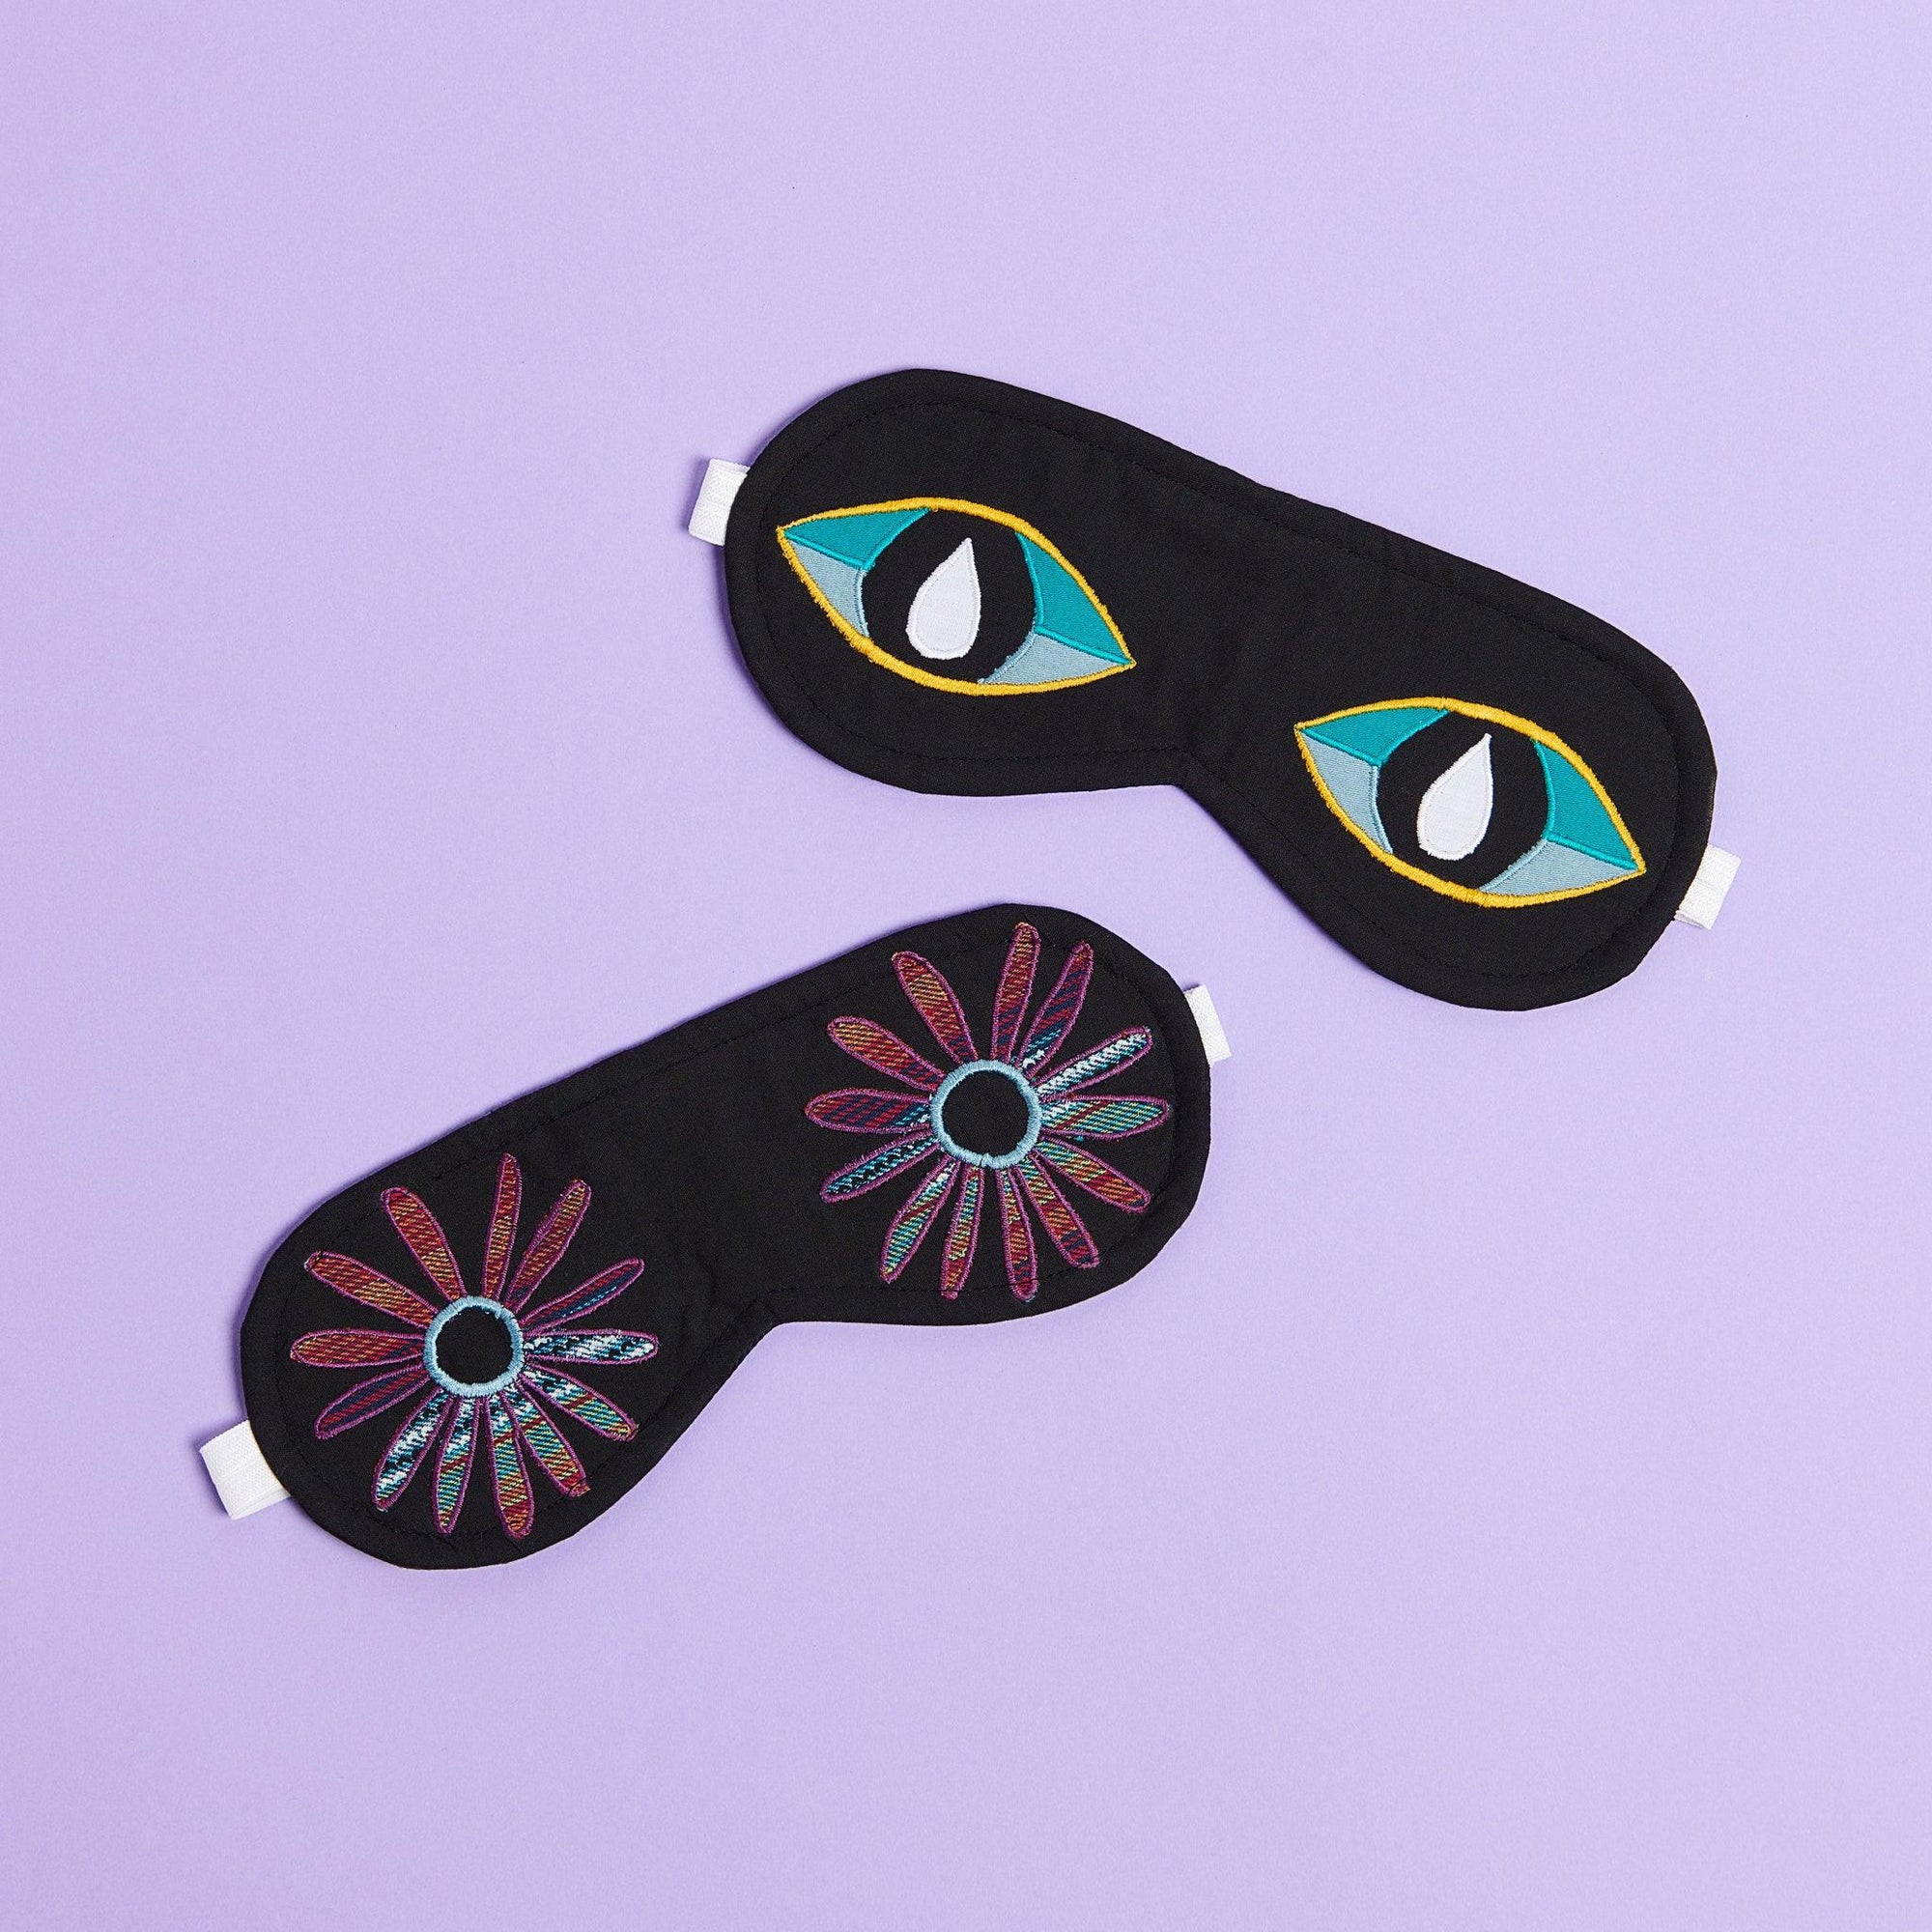 Two eye masks on a purple background. Eye Mask with Flower eyes made out of a woven purple blue green fabric and and eye mask with wide awake eyes. The eyes are teal blue on top, light blue on the bottom and a black pupil with a teardrop in the center. 